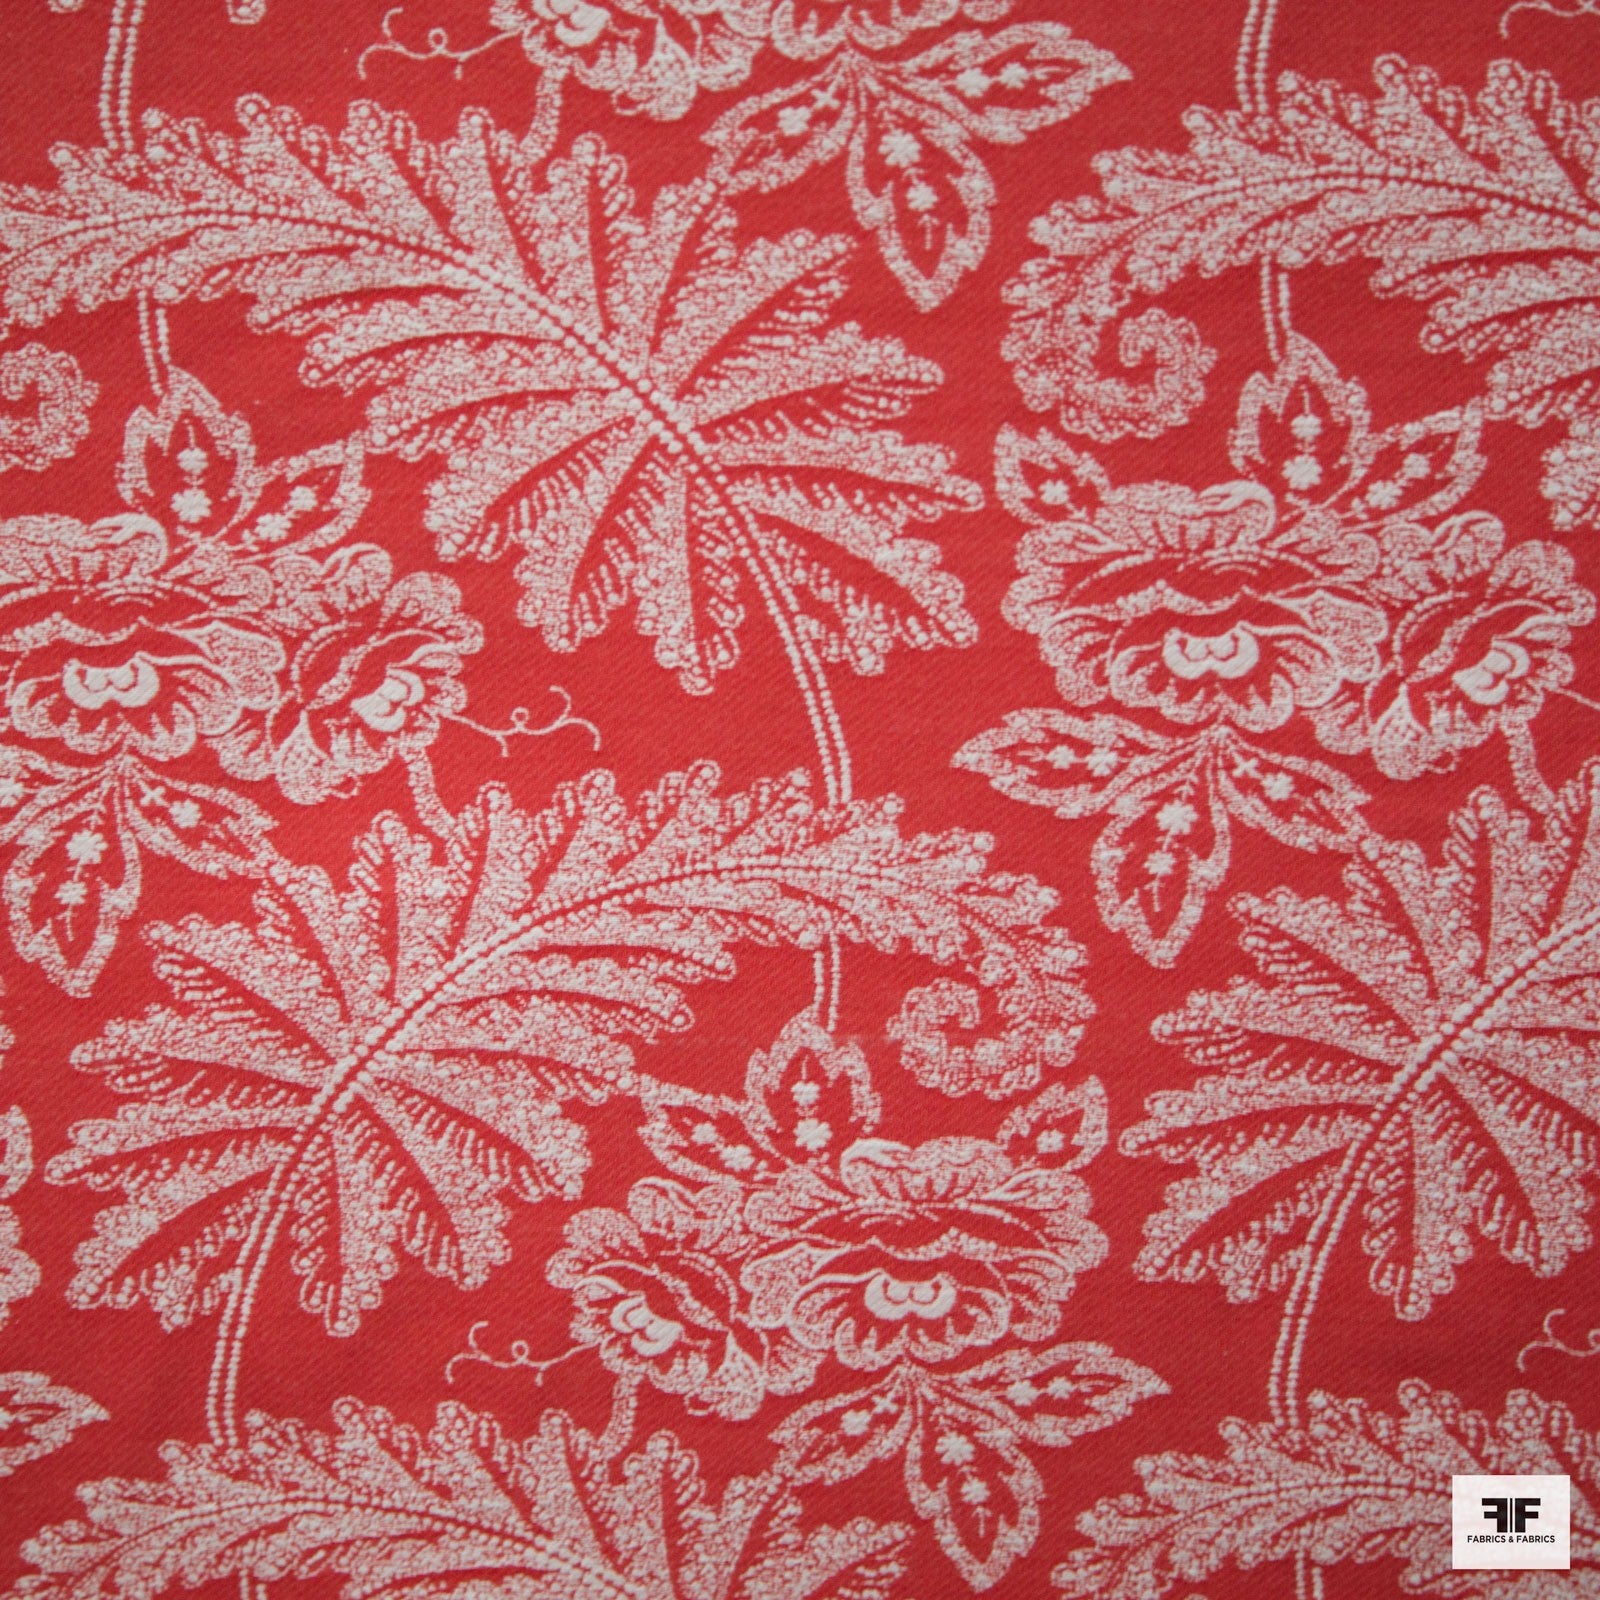 Woven Leaf Brocade - Red/White